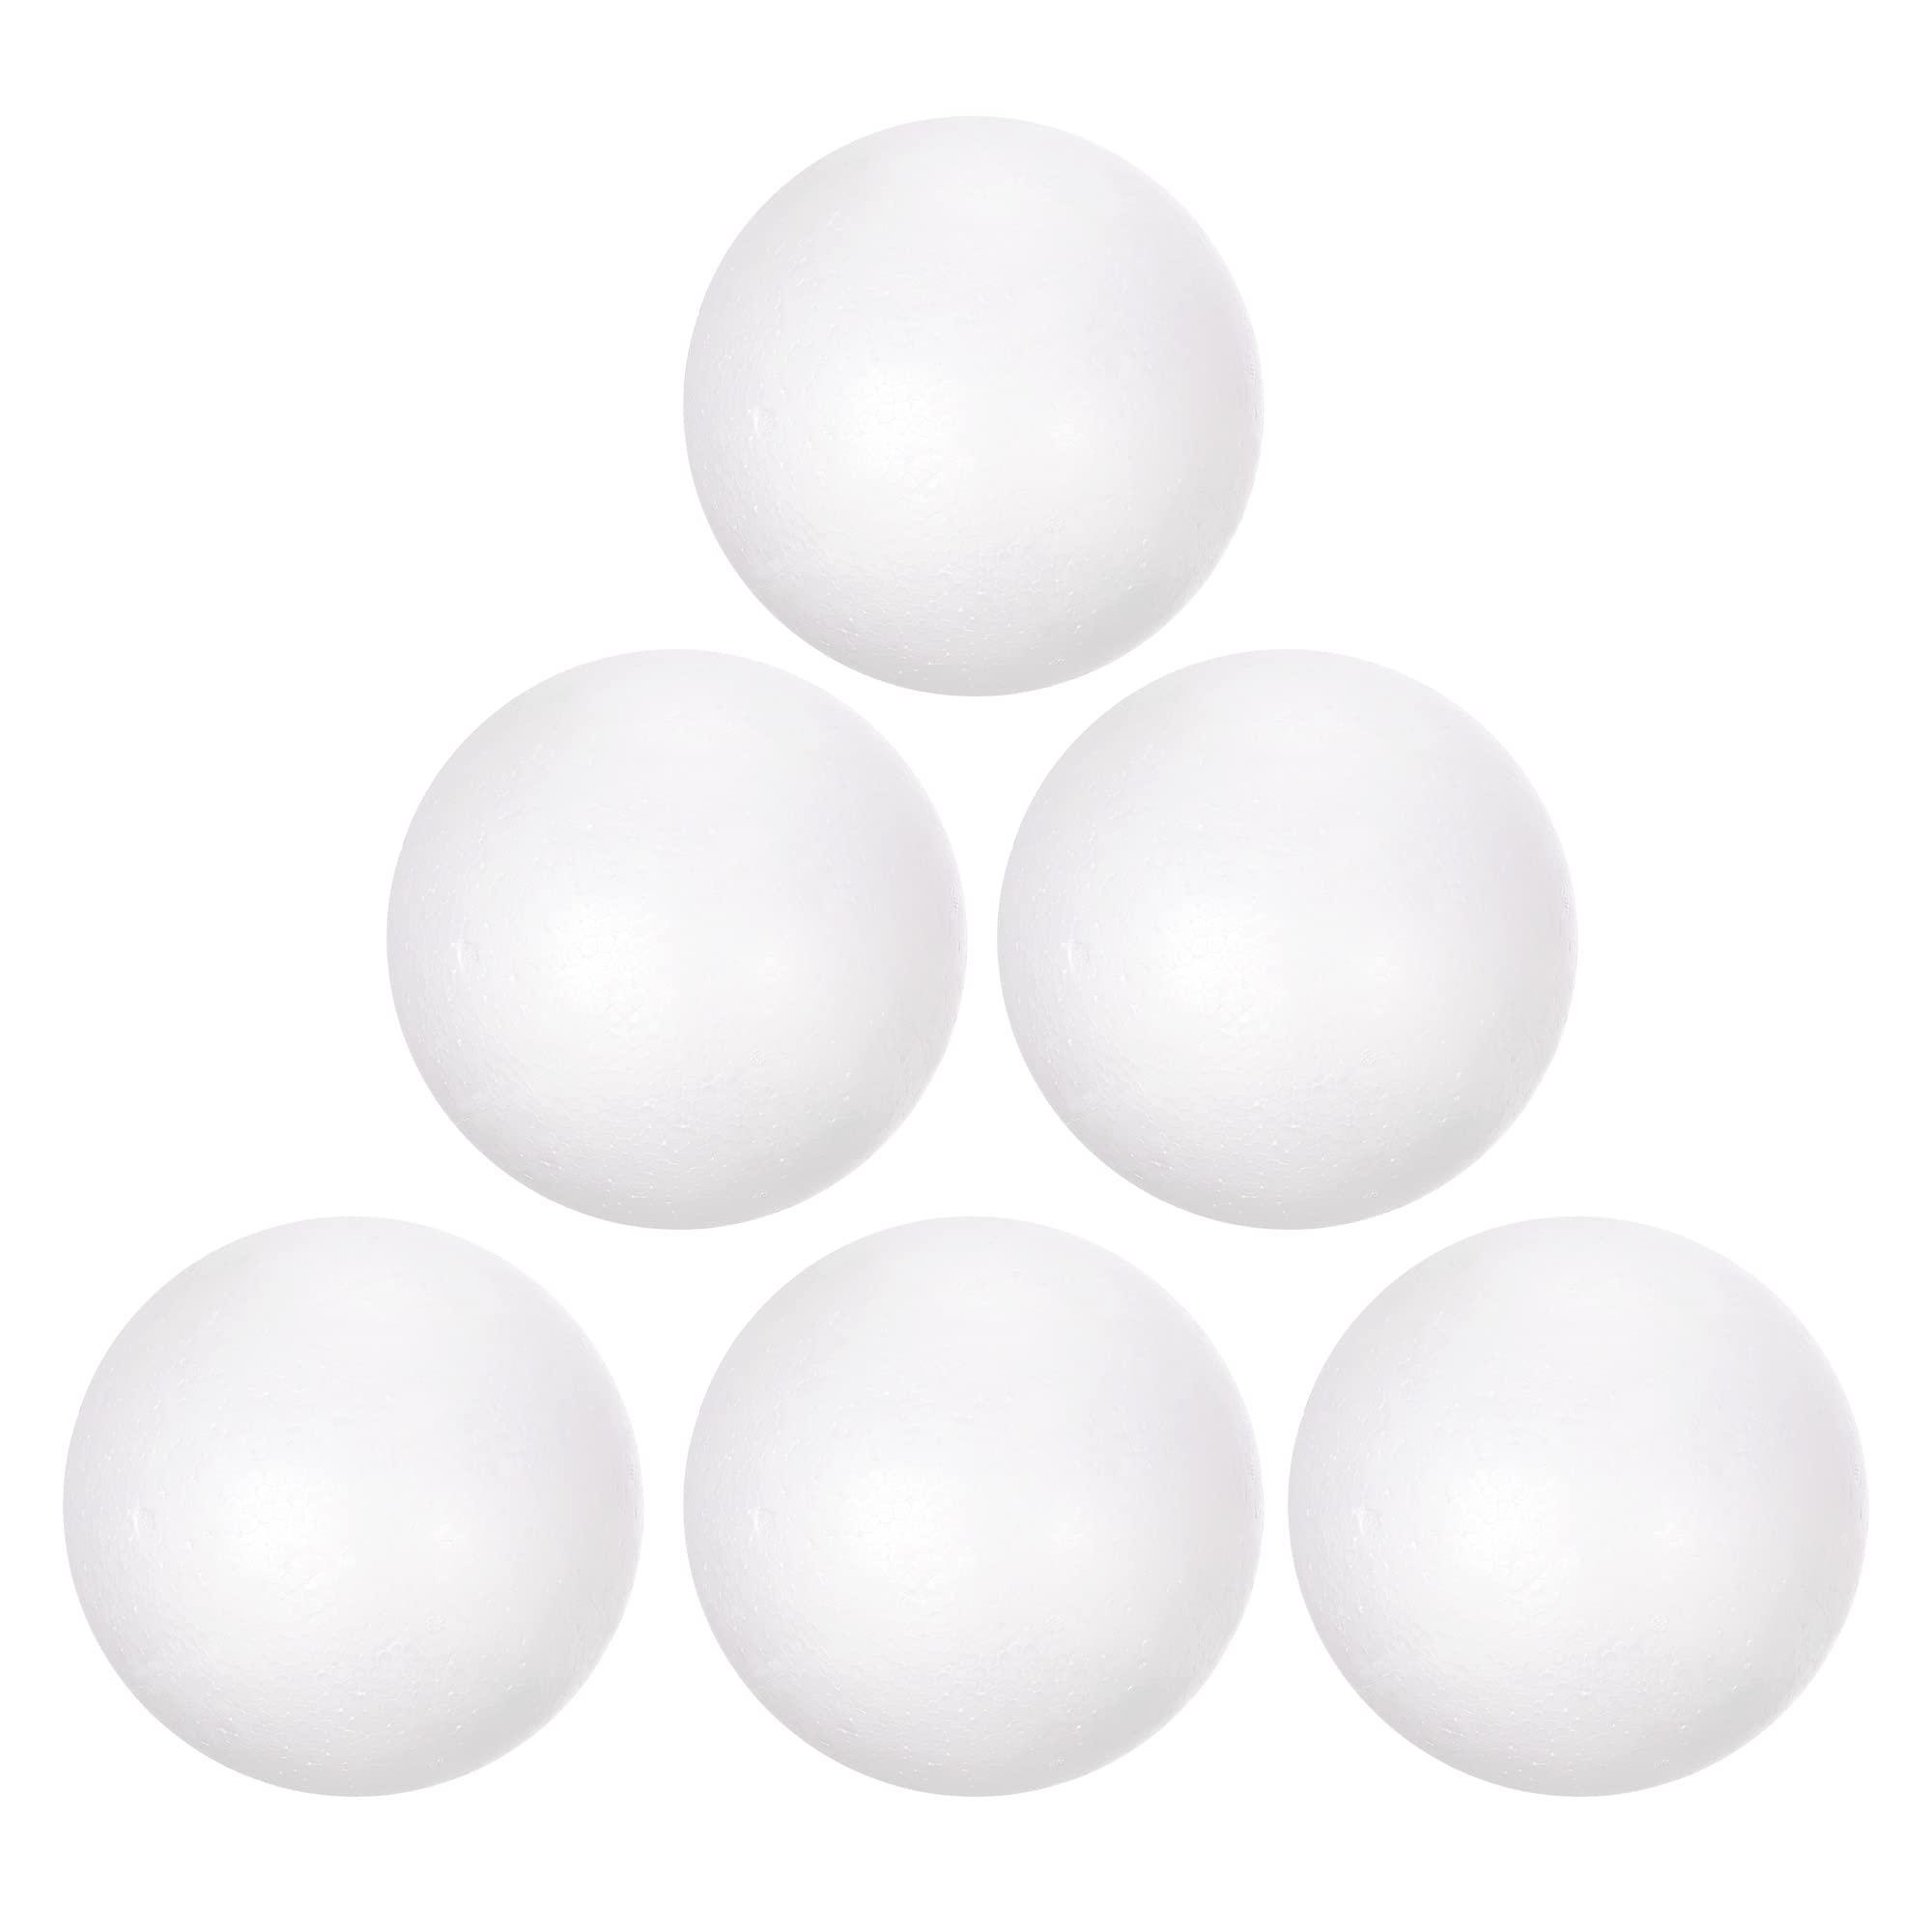 sourcing map 18Pcs 2.35" White Polystyrene Foam Balls Smooth Round Solid Ball for Crafts, Art, DIY, Household, Party Decorations 0